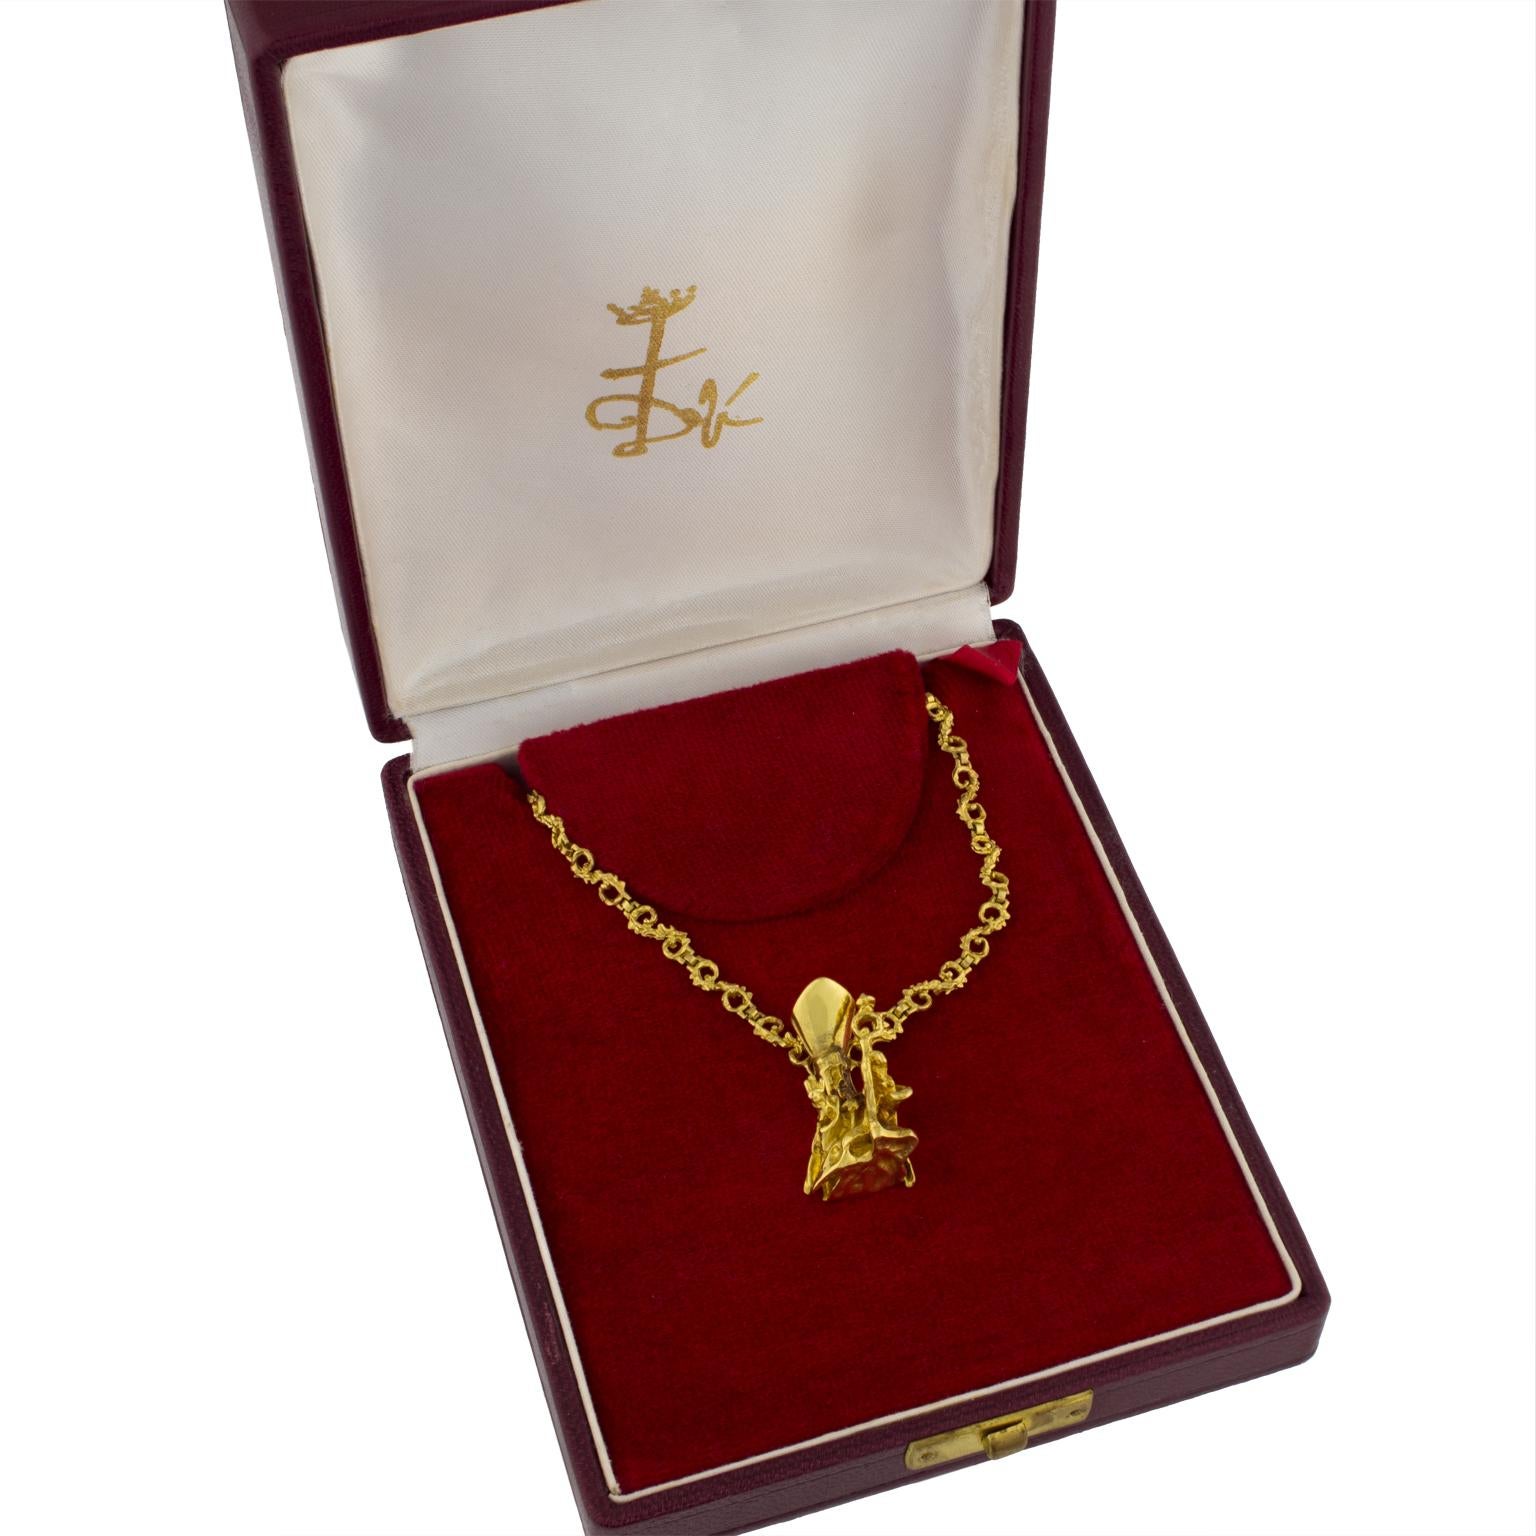 Women's or Men's Salvador Dalí 18 Karat Yellow Gold Pendant and Chain Necklace